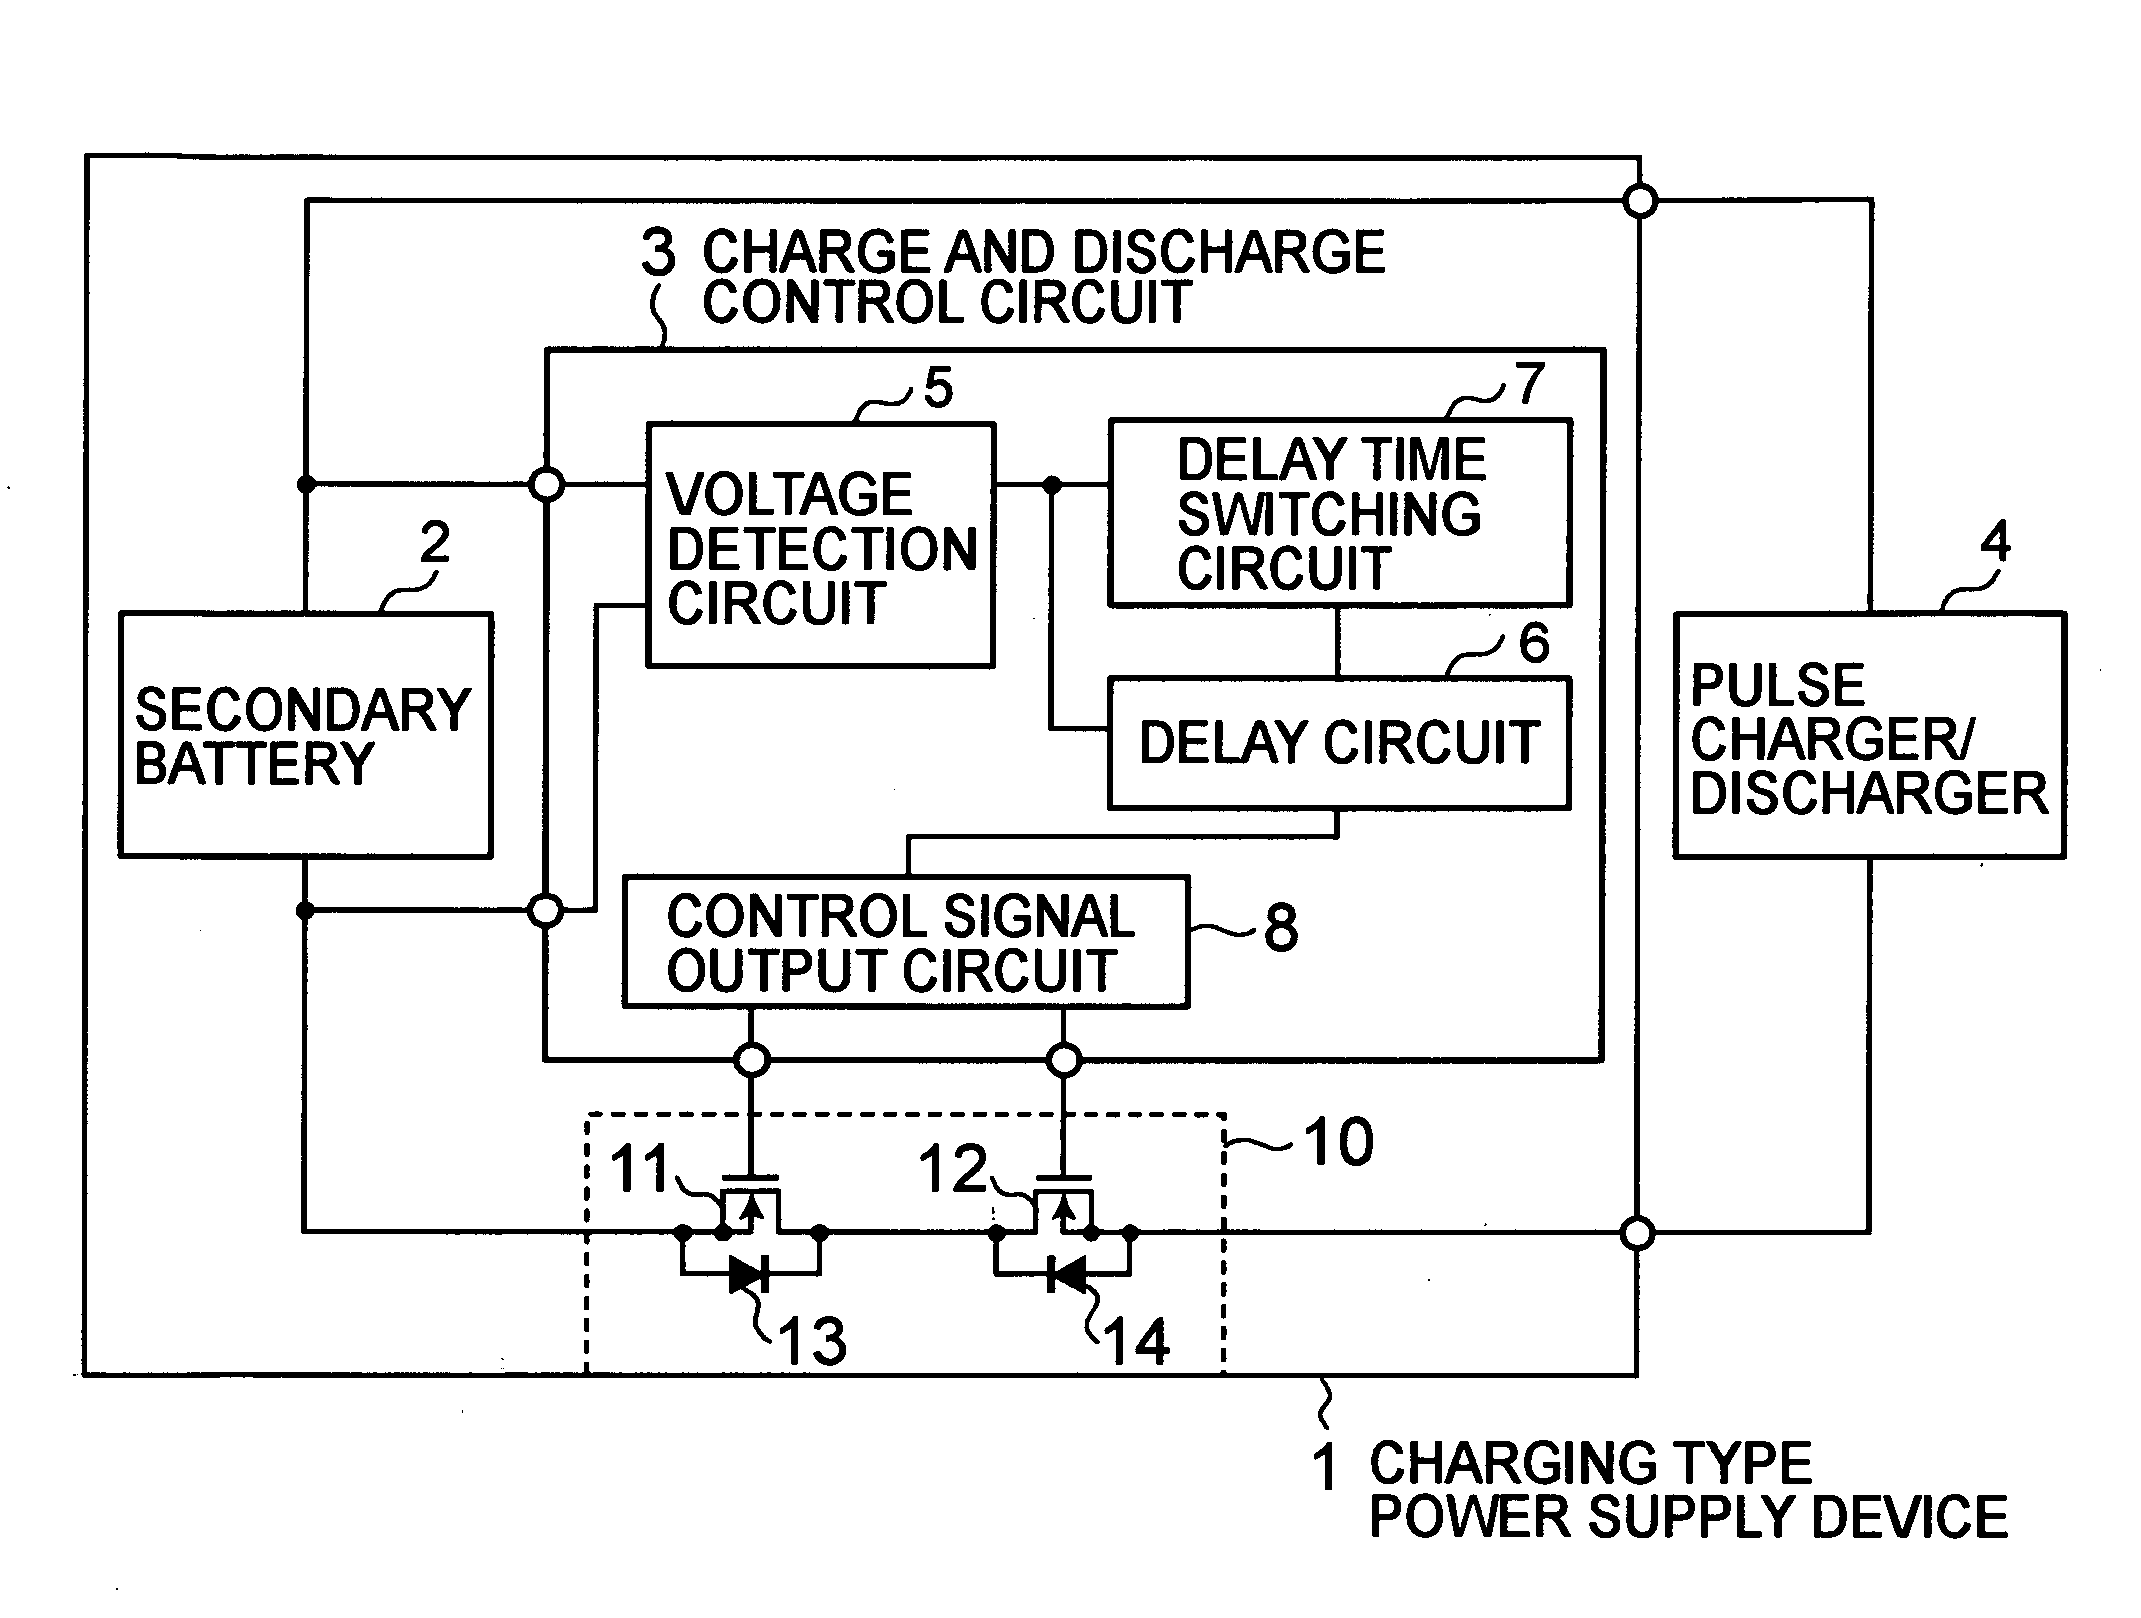 Charge and discharge control circuit and rechargeable power supply device